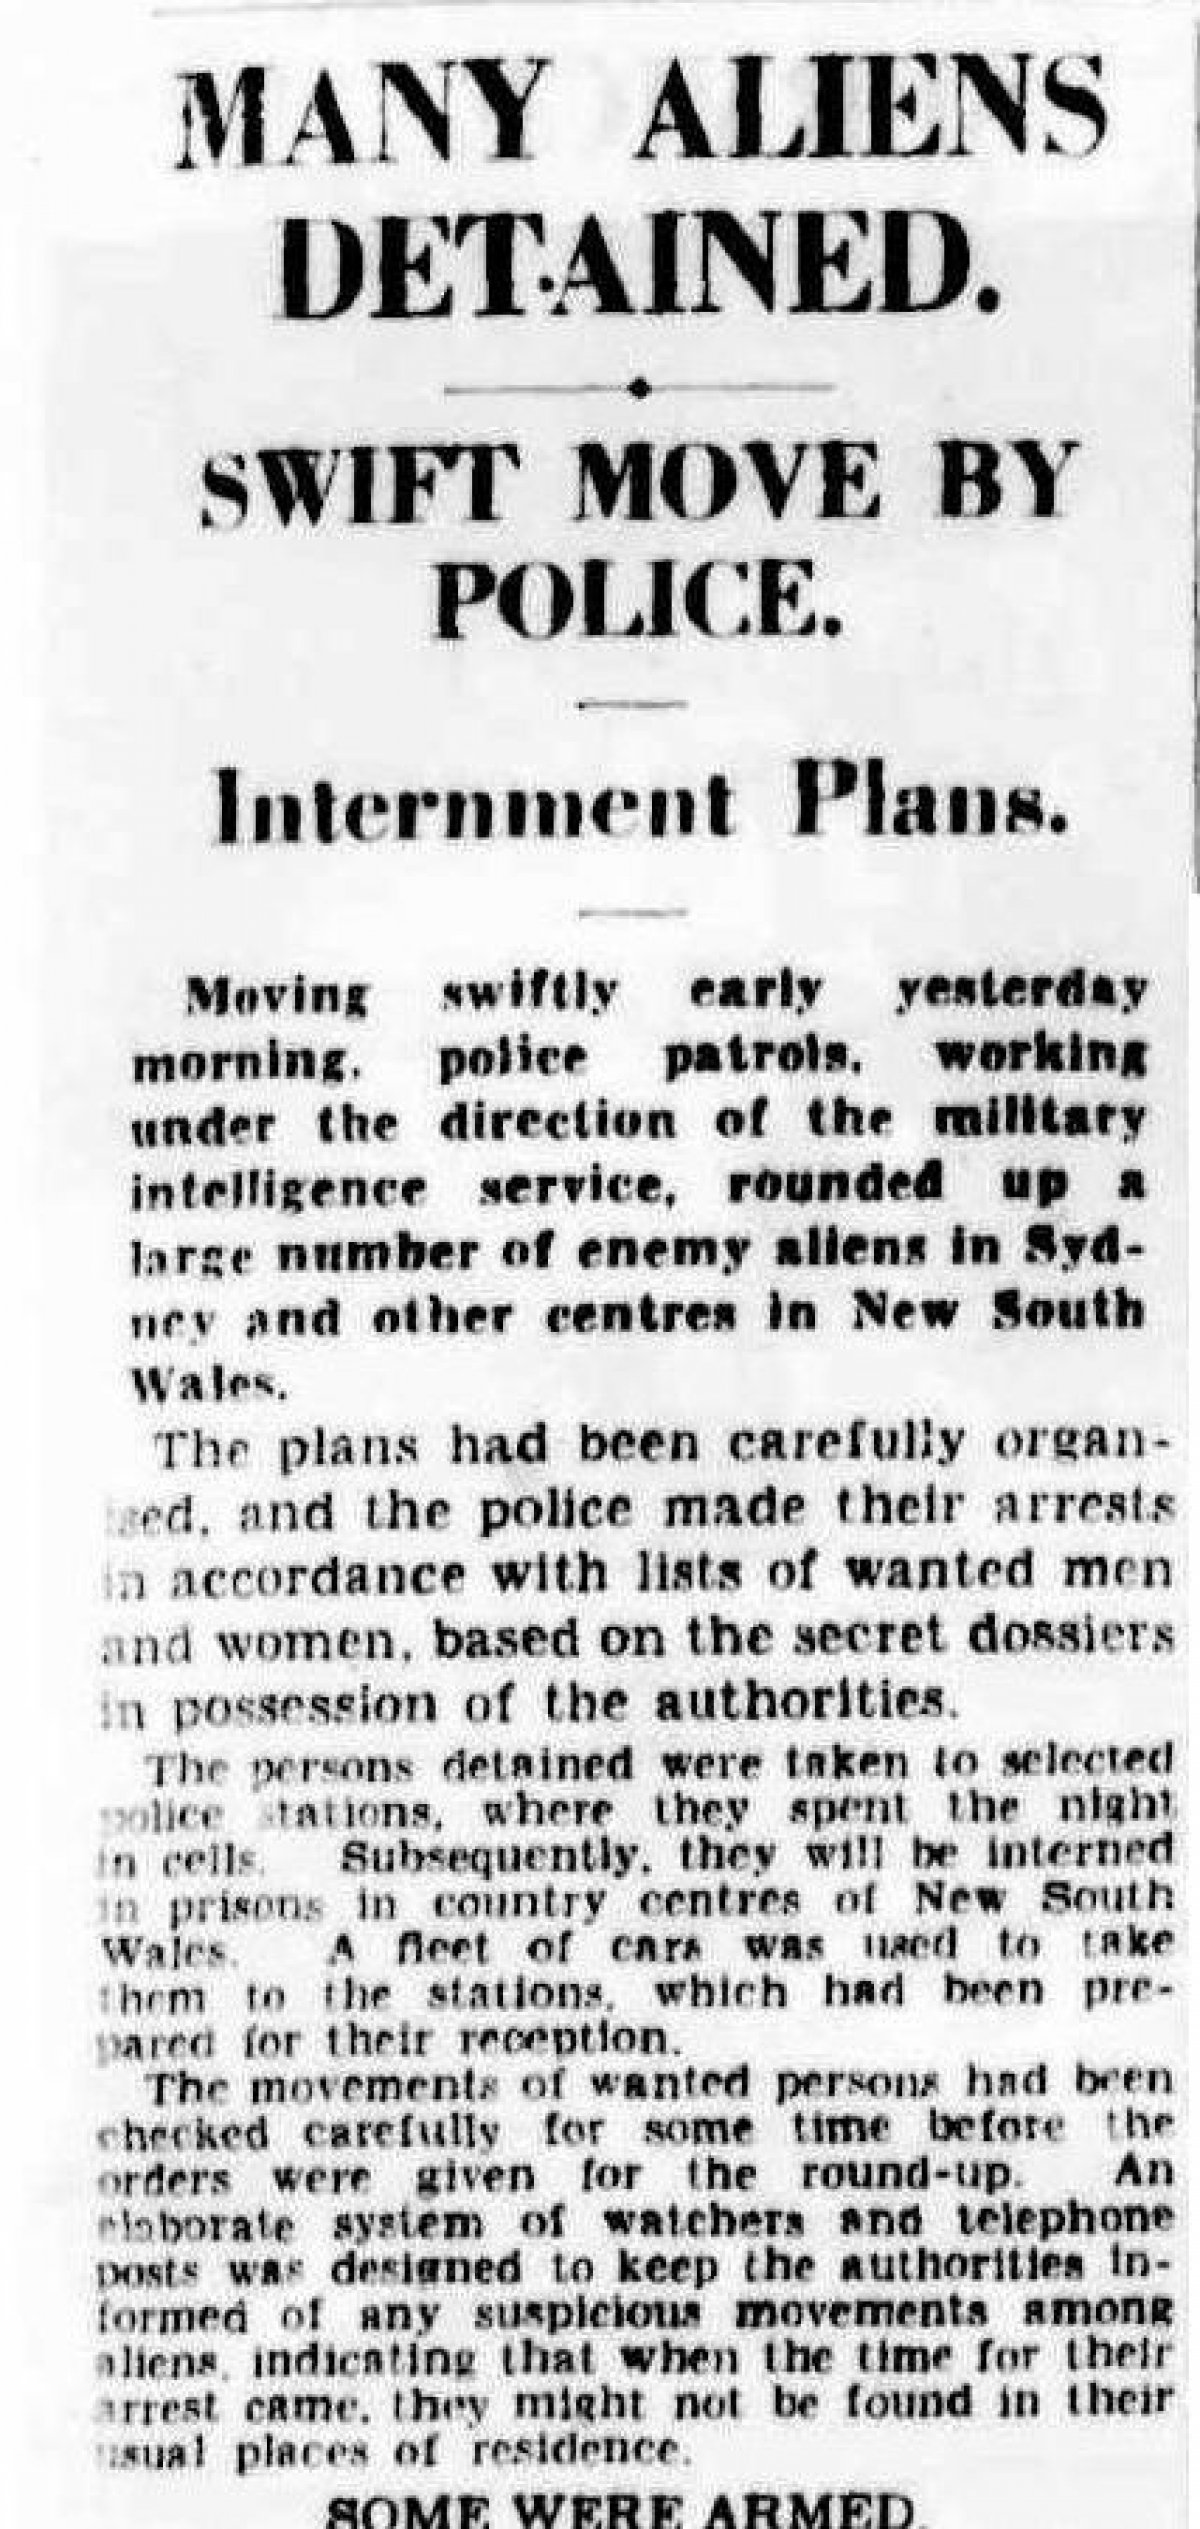 A newspaper article with the headline "Many aliens detained"